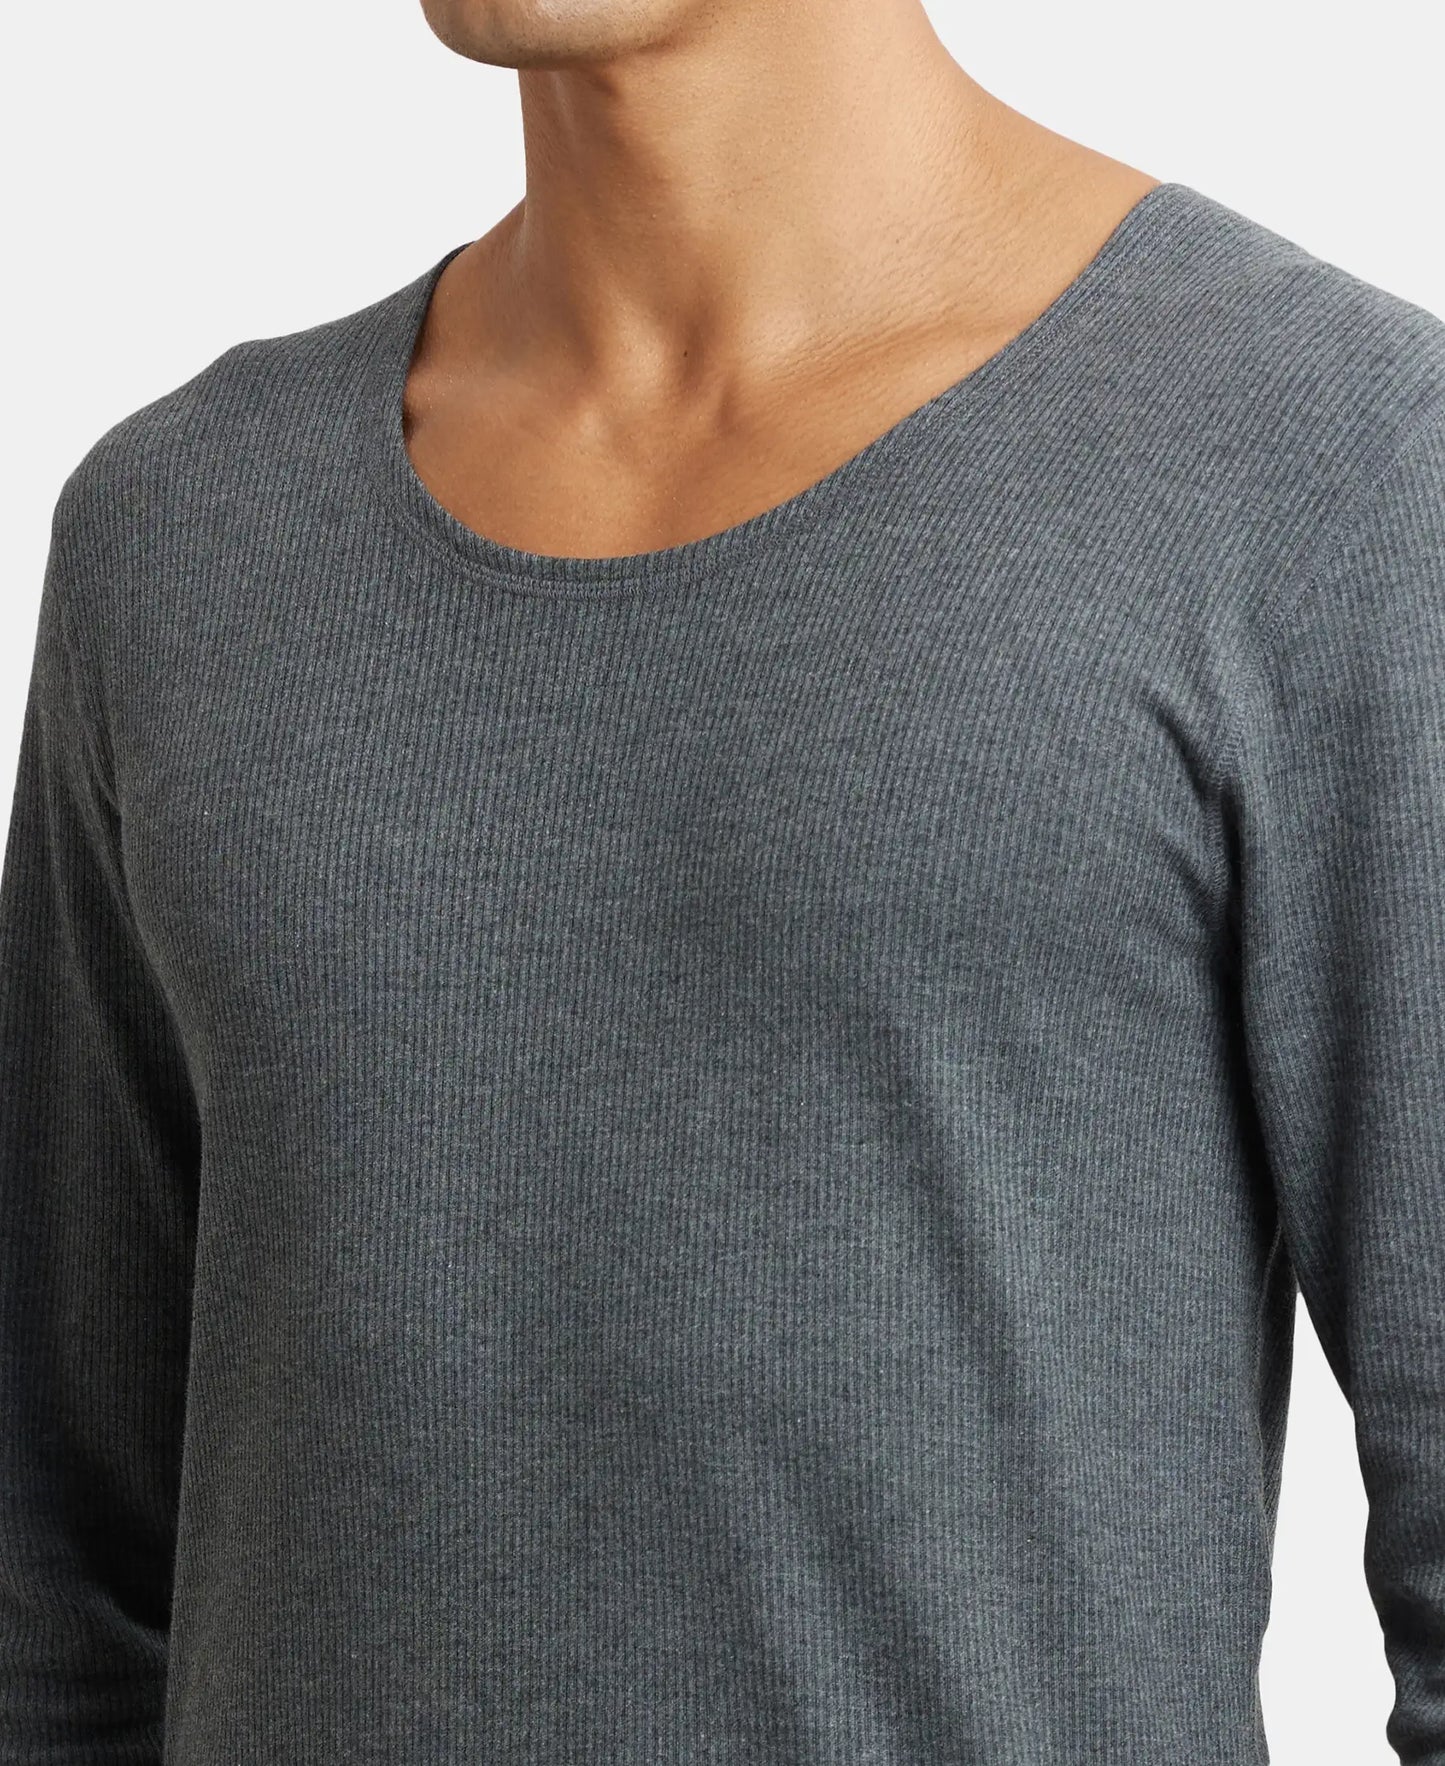 Super Combed Cotton Rich Full Sleeve Thermal Undershirt with StayWarm Technology - Charcoal Melange-6